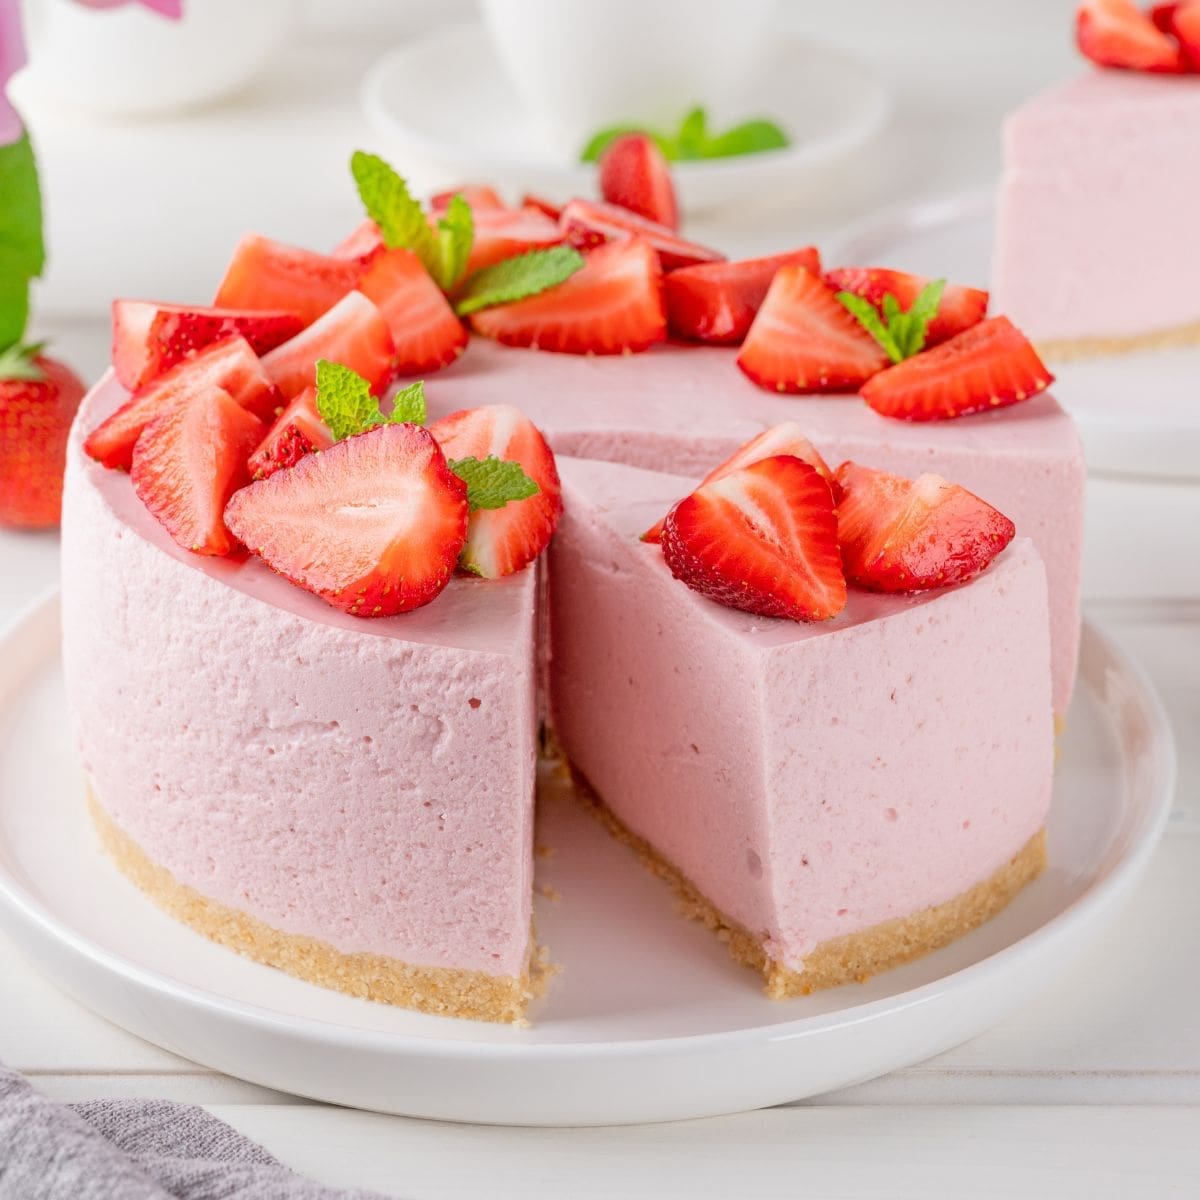 15 Best Recipes With Strawberry Extract (Plus Usage Tips!)